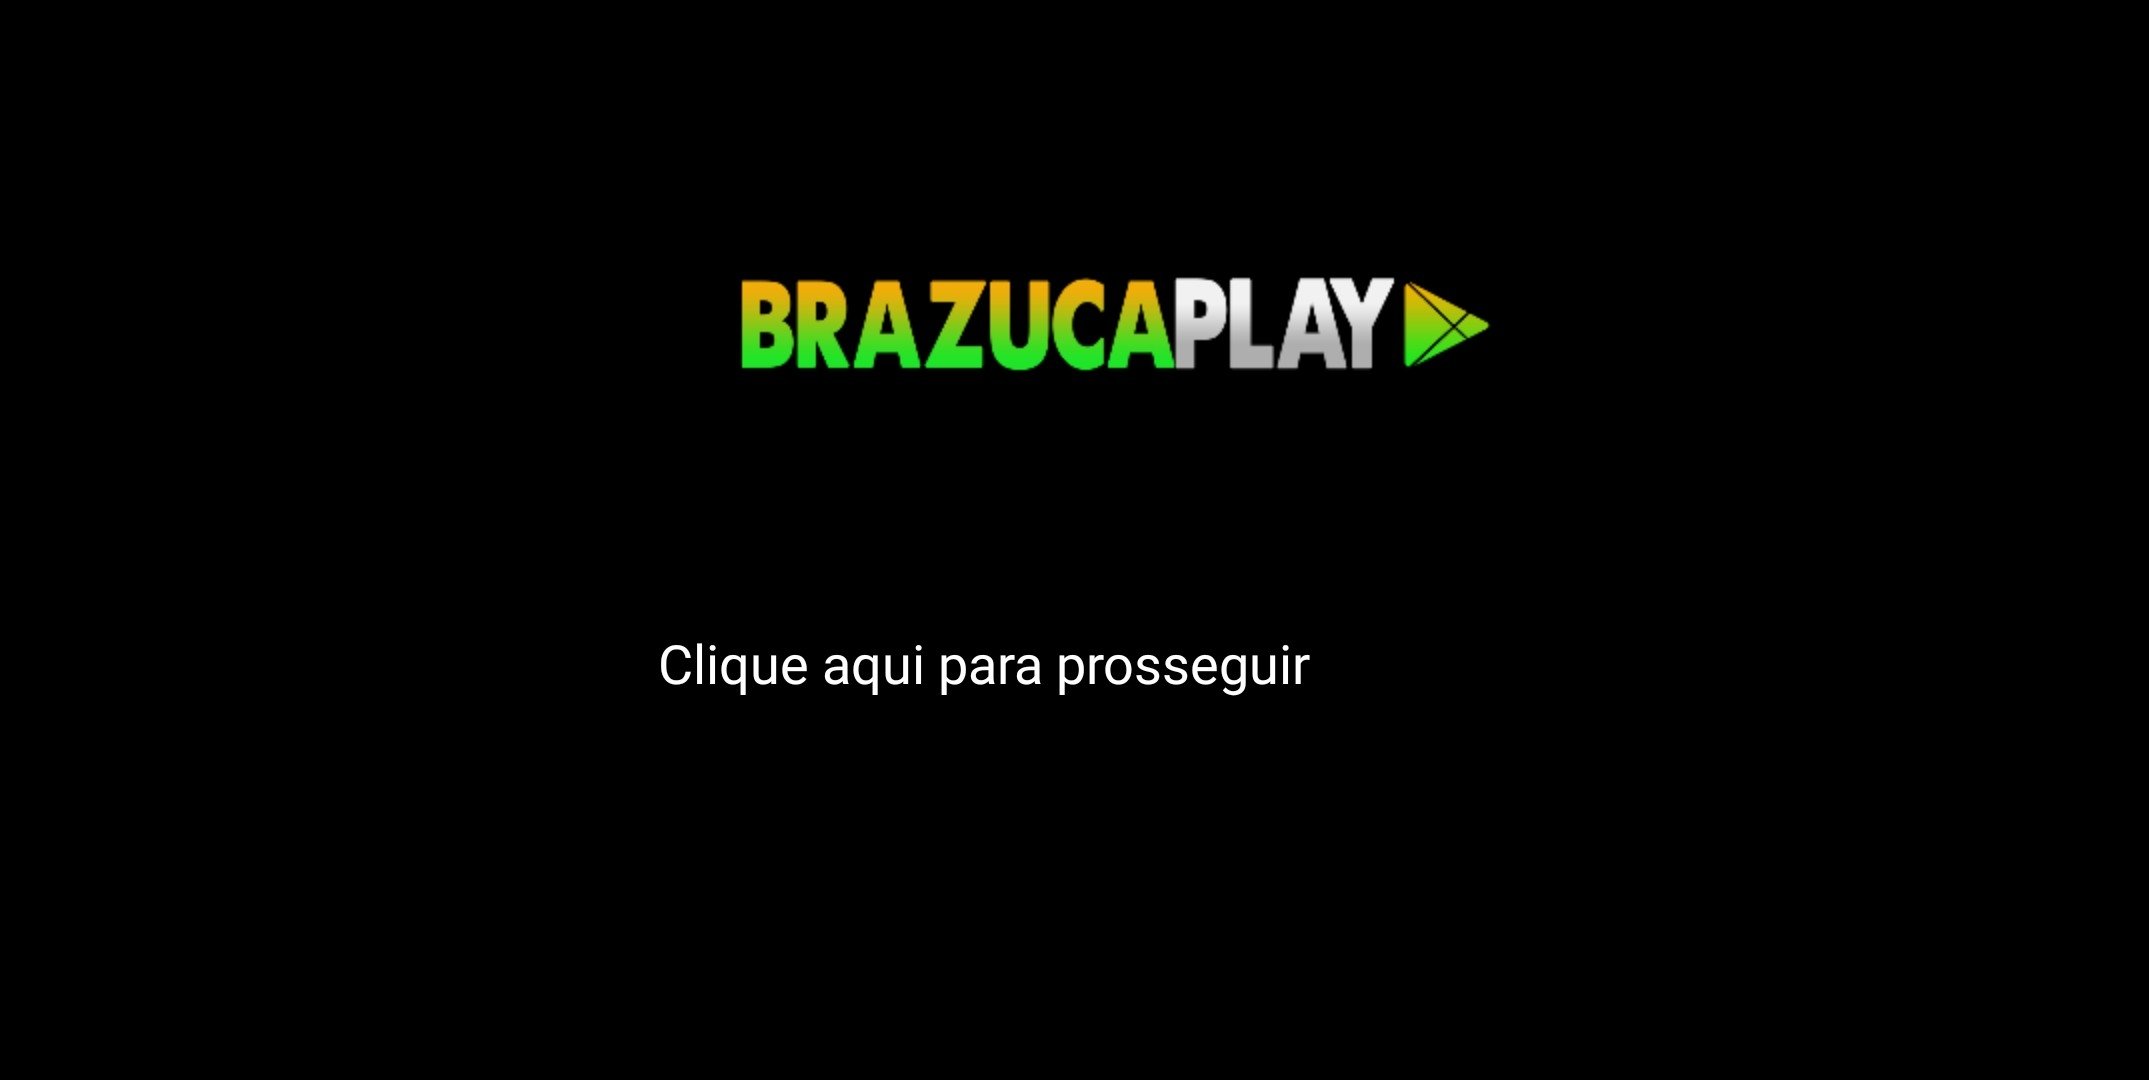 brazuca play addon 2020 download